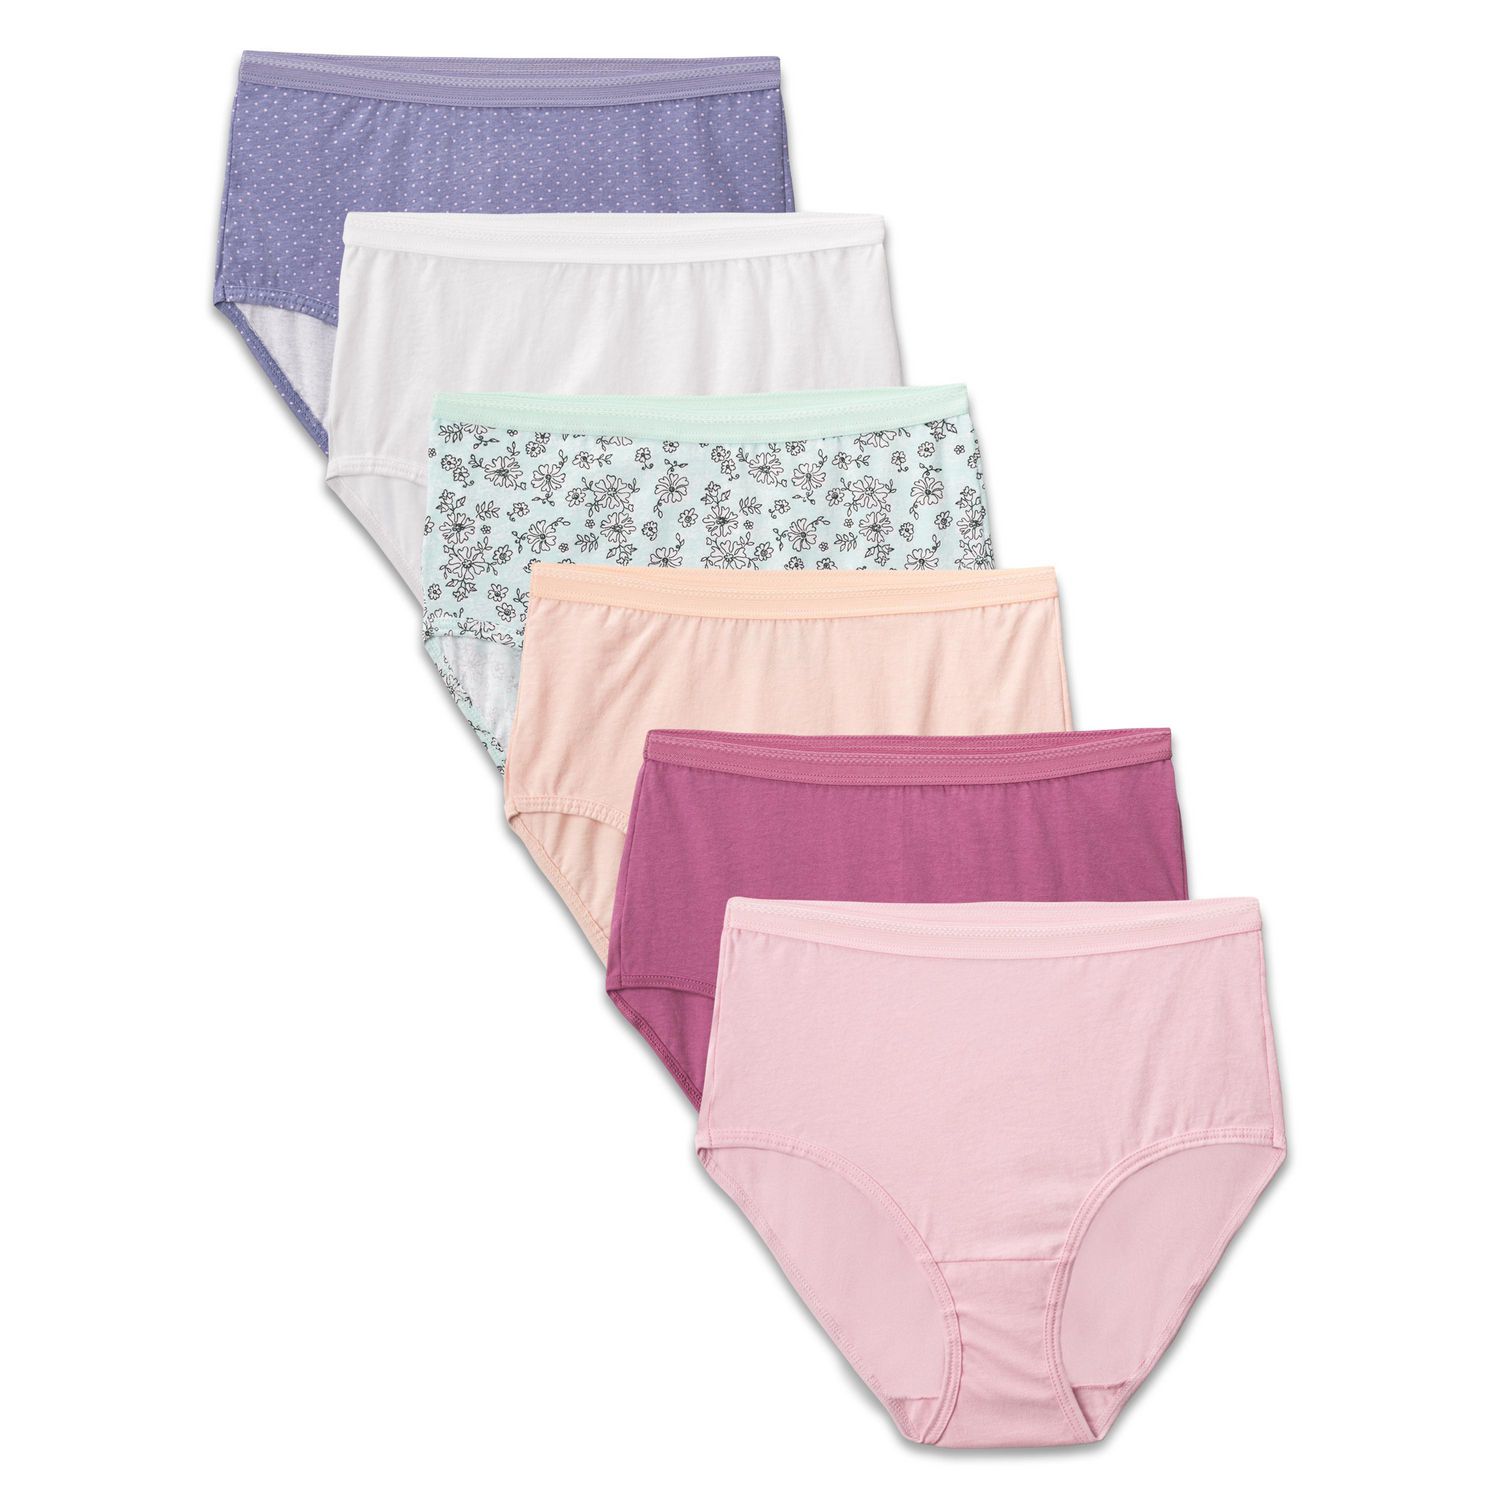 Fruit of the Loom Ladies Assorted Colours Cotton Briefs, 6-Pack 